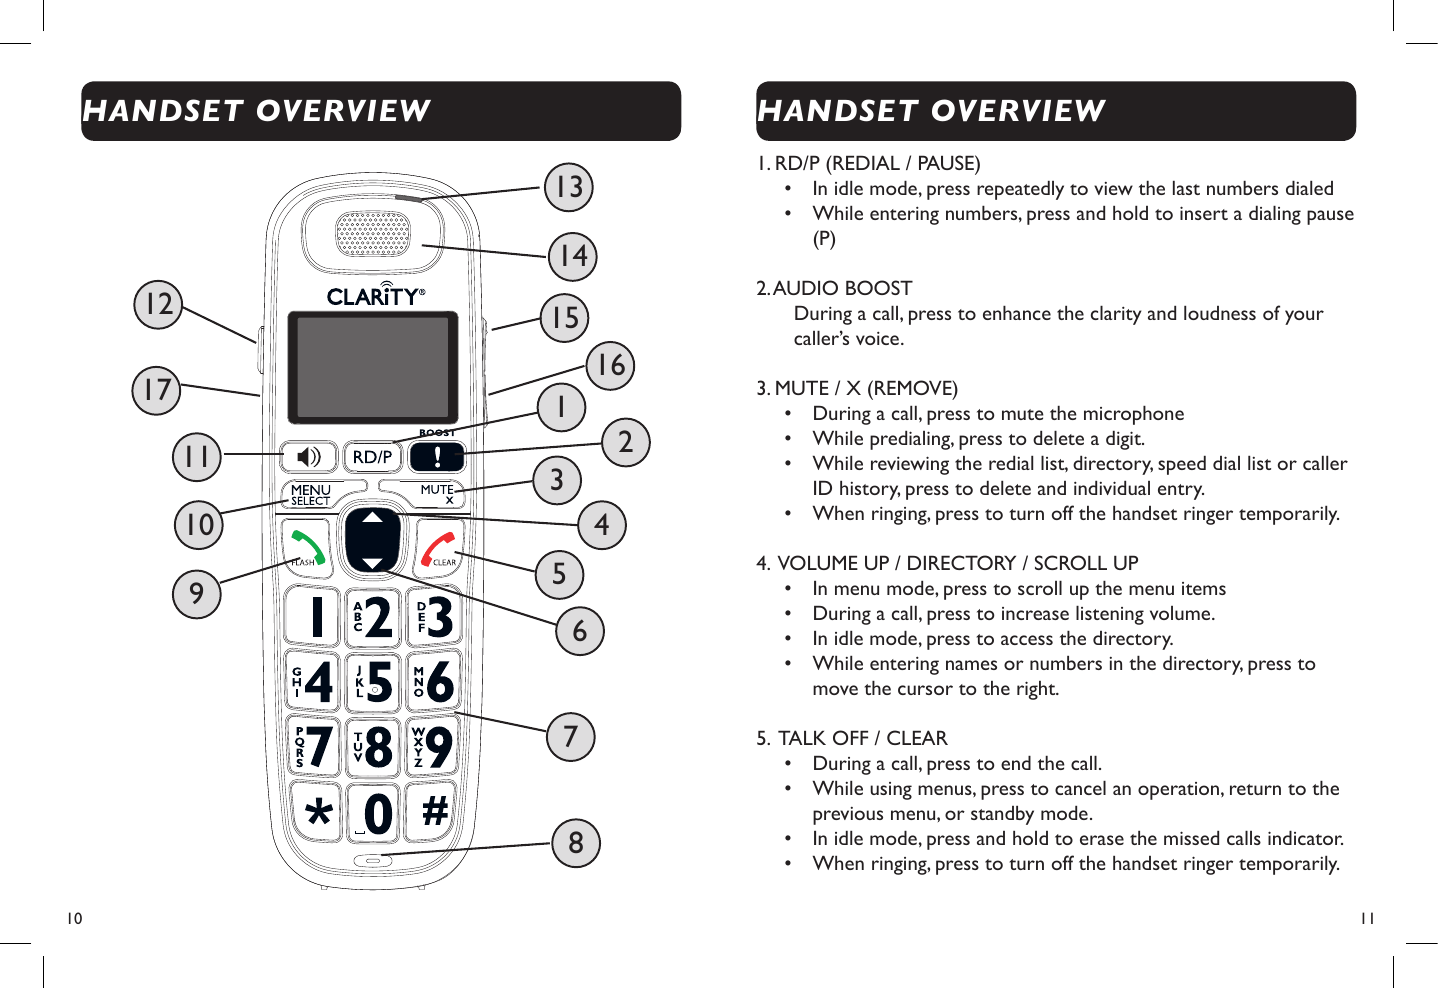 10  11HANDSET OVERVIEW1. RD/P (REDIAL / PAUSE)•  In idle mode, press repeatedly to view the last numbers dialed •  While entering numbers, press and hold to insert a dialing pause (P)2. AUDIO BOOSTDuring a call, press to enhance the clarity and loudness of your caller’s voice.3. MUTE / X (REMOVE)•  During a call, press to mute the microphone•  While predialing, press to delete a digit.•  While reviewing the redial list, directory, speed dial list or caller ID history, press to delete and individual entry.•  When ringing, press to turn off the handset ringer temporarily.4.  VOLUME UP / DIRECTORY / SCROLL UP•  In menu mode, press to scroll up the menu items•  During a call, press to increase listening volume.•  In idle mode, press to access the directory.•  While entering names or numbers in the directory, press to move the cursor to the right.5.  TALK OFF / CLEAR•  During a call, press to end the call.•  While using menus, press to cancel an operation, return to the previous menu, or standby mode.•  In idle mode, press and hold to erase the missed calls indicator.•  When ringing, press to turn off the handset ringer temporarily.HANDSET OVERVIEW 2 4 6 8 10 11 9 7 5 3 1 12  15 17  16 14 13